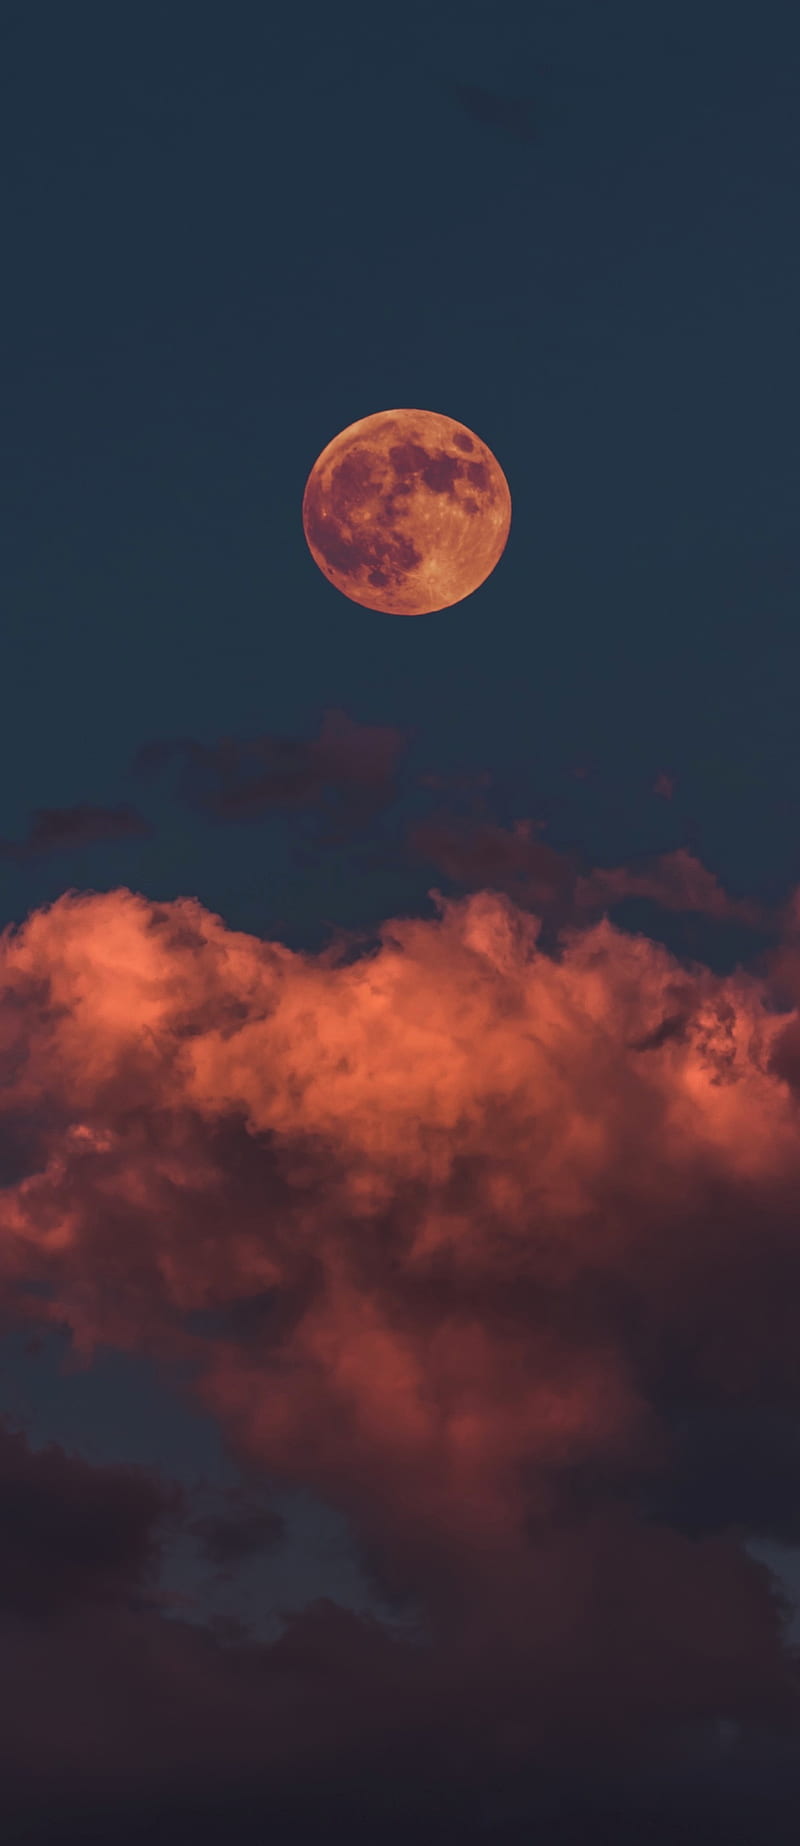 Moon Iphone Wallpaper Images  Free Photos PNG Stickers Wallpapers   Backgrounds  rawpixel